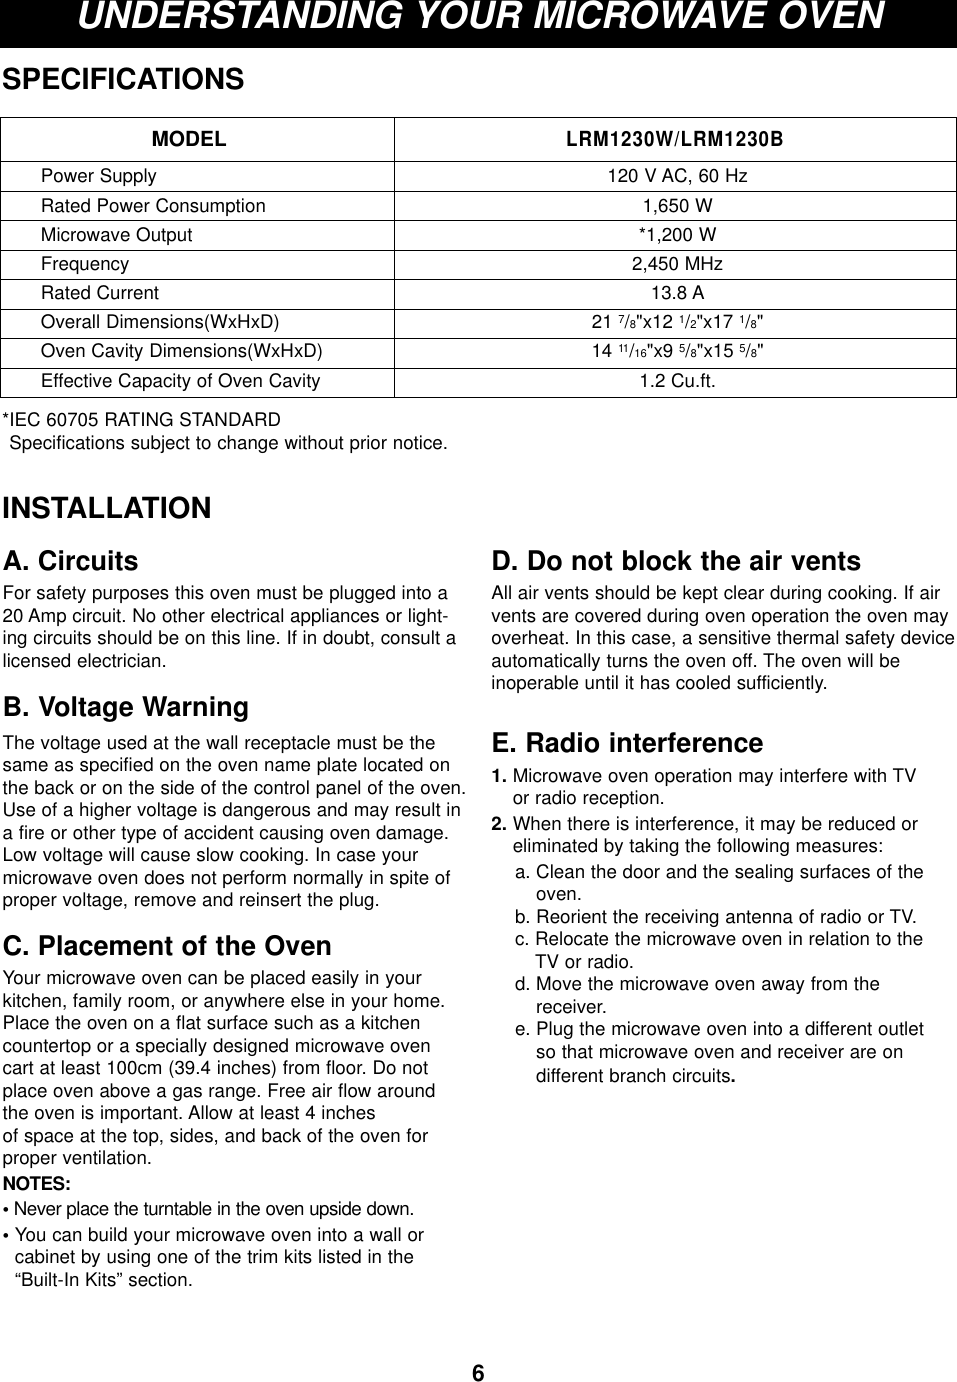 6UNDERSTANDING YOUR MICROWAVE OVENSPECIFICATIONS*IEC 60705 RATING STANDARD Specifications subject to change without prior notice.MODELLRM1230W/LRM1230BPower SupplyRated Power ConsumptionMicrowave OutputFrequencyRated CurrentOverall Dimensions(WxHxD)Oven Cavity Dimensions(WxHxD)Effective Capacity of Oven Cavity120 V AC, 60 Hz1,650 W*1,200 W2,450 MHz13.8 A21 7/8&quot;x12 1/2&quot;x17 1/8&quot;14 11/16&quot;x9 5/8&quot;x15 5/8&quot;1.2 Cu.ft.INSTALLATIONA. CircuitsFor safety purposes this oven must be plugged into a20 Amp circuit. No other electrical appliances or light-ing circuits should be on this line. If in doubt, consult alicensed electrician.B. Voltage Warning The voltage used at the wall receptacle must be thesame as specified on the oven name plate located onthe back or on the side of the control panel of the oven.Use of a higher voltage is dangerous and may result ina fire or other type of accident causing oven damage.Low voltage will cause slow cooking. In case yourmicrowave oven does not perform normally in spite ofproper voltage, remove and reinsert the plug.C. Placement of the OvenYour microwave oven can be placed easily in yourkitchen, family room, or anywhere else in your home.Place the oven on a flat surface such as a kitchencountertop or a specially designed microwave ovencart at least 100cm (39.4 inches) from floor. Do notplace oven above a gas range. Free air flow aroundthe oven is important. Allow at least 4 inches of space at the top, sides, and back of the oven forproper ventilation. NOTES:•Never place the turntable in the oven upside down.• You can build your microwave oven into a wall or cabinet by using one of the trim kits listed in the“Built-In Kits” section.D. Do not block the air ventsAll air vents should be kept clear during cooking. If airvents are covered during oven operation the oven mayoverheat. In this case, a sensitive thermal safety deviceautomatically turns the oven off. The oven will be inoperable until it has cooled sufficiently.E. Radio interference1. Microwave oven operation may interfere with TV or radio reception.2. When there is interference, it may be reduced oreliminated by taking the following measures:a. Clean the door and the sealing surfaces of theoven.b. Reorient the receiving antenna of radio or TV.c. Relocate the microwave oven in relation to the TV or radio.d. Move the microwave oven away from the receiver.e. Plug the microwave oven into a different outlet so that microwave oven and receiver are on different branch circuits.